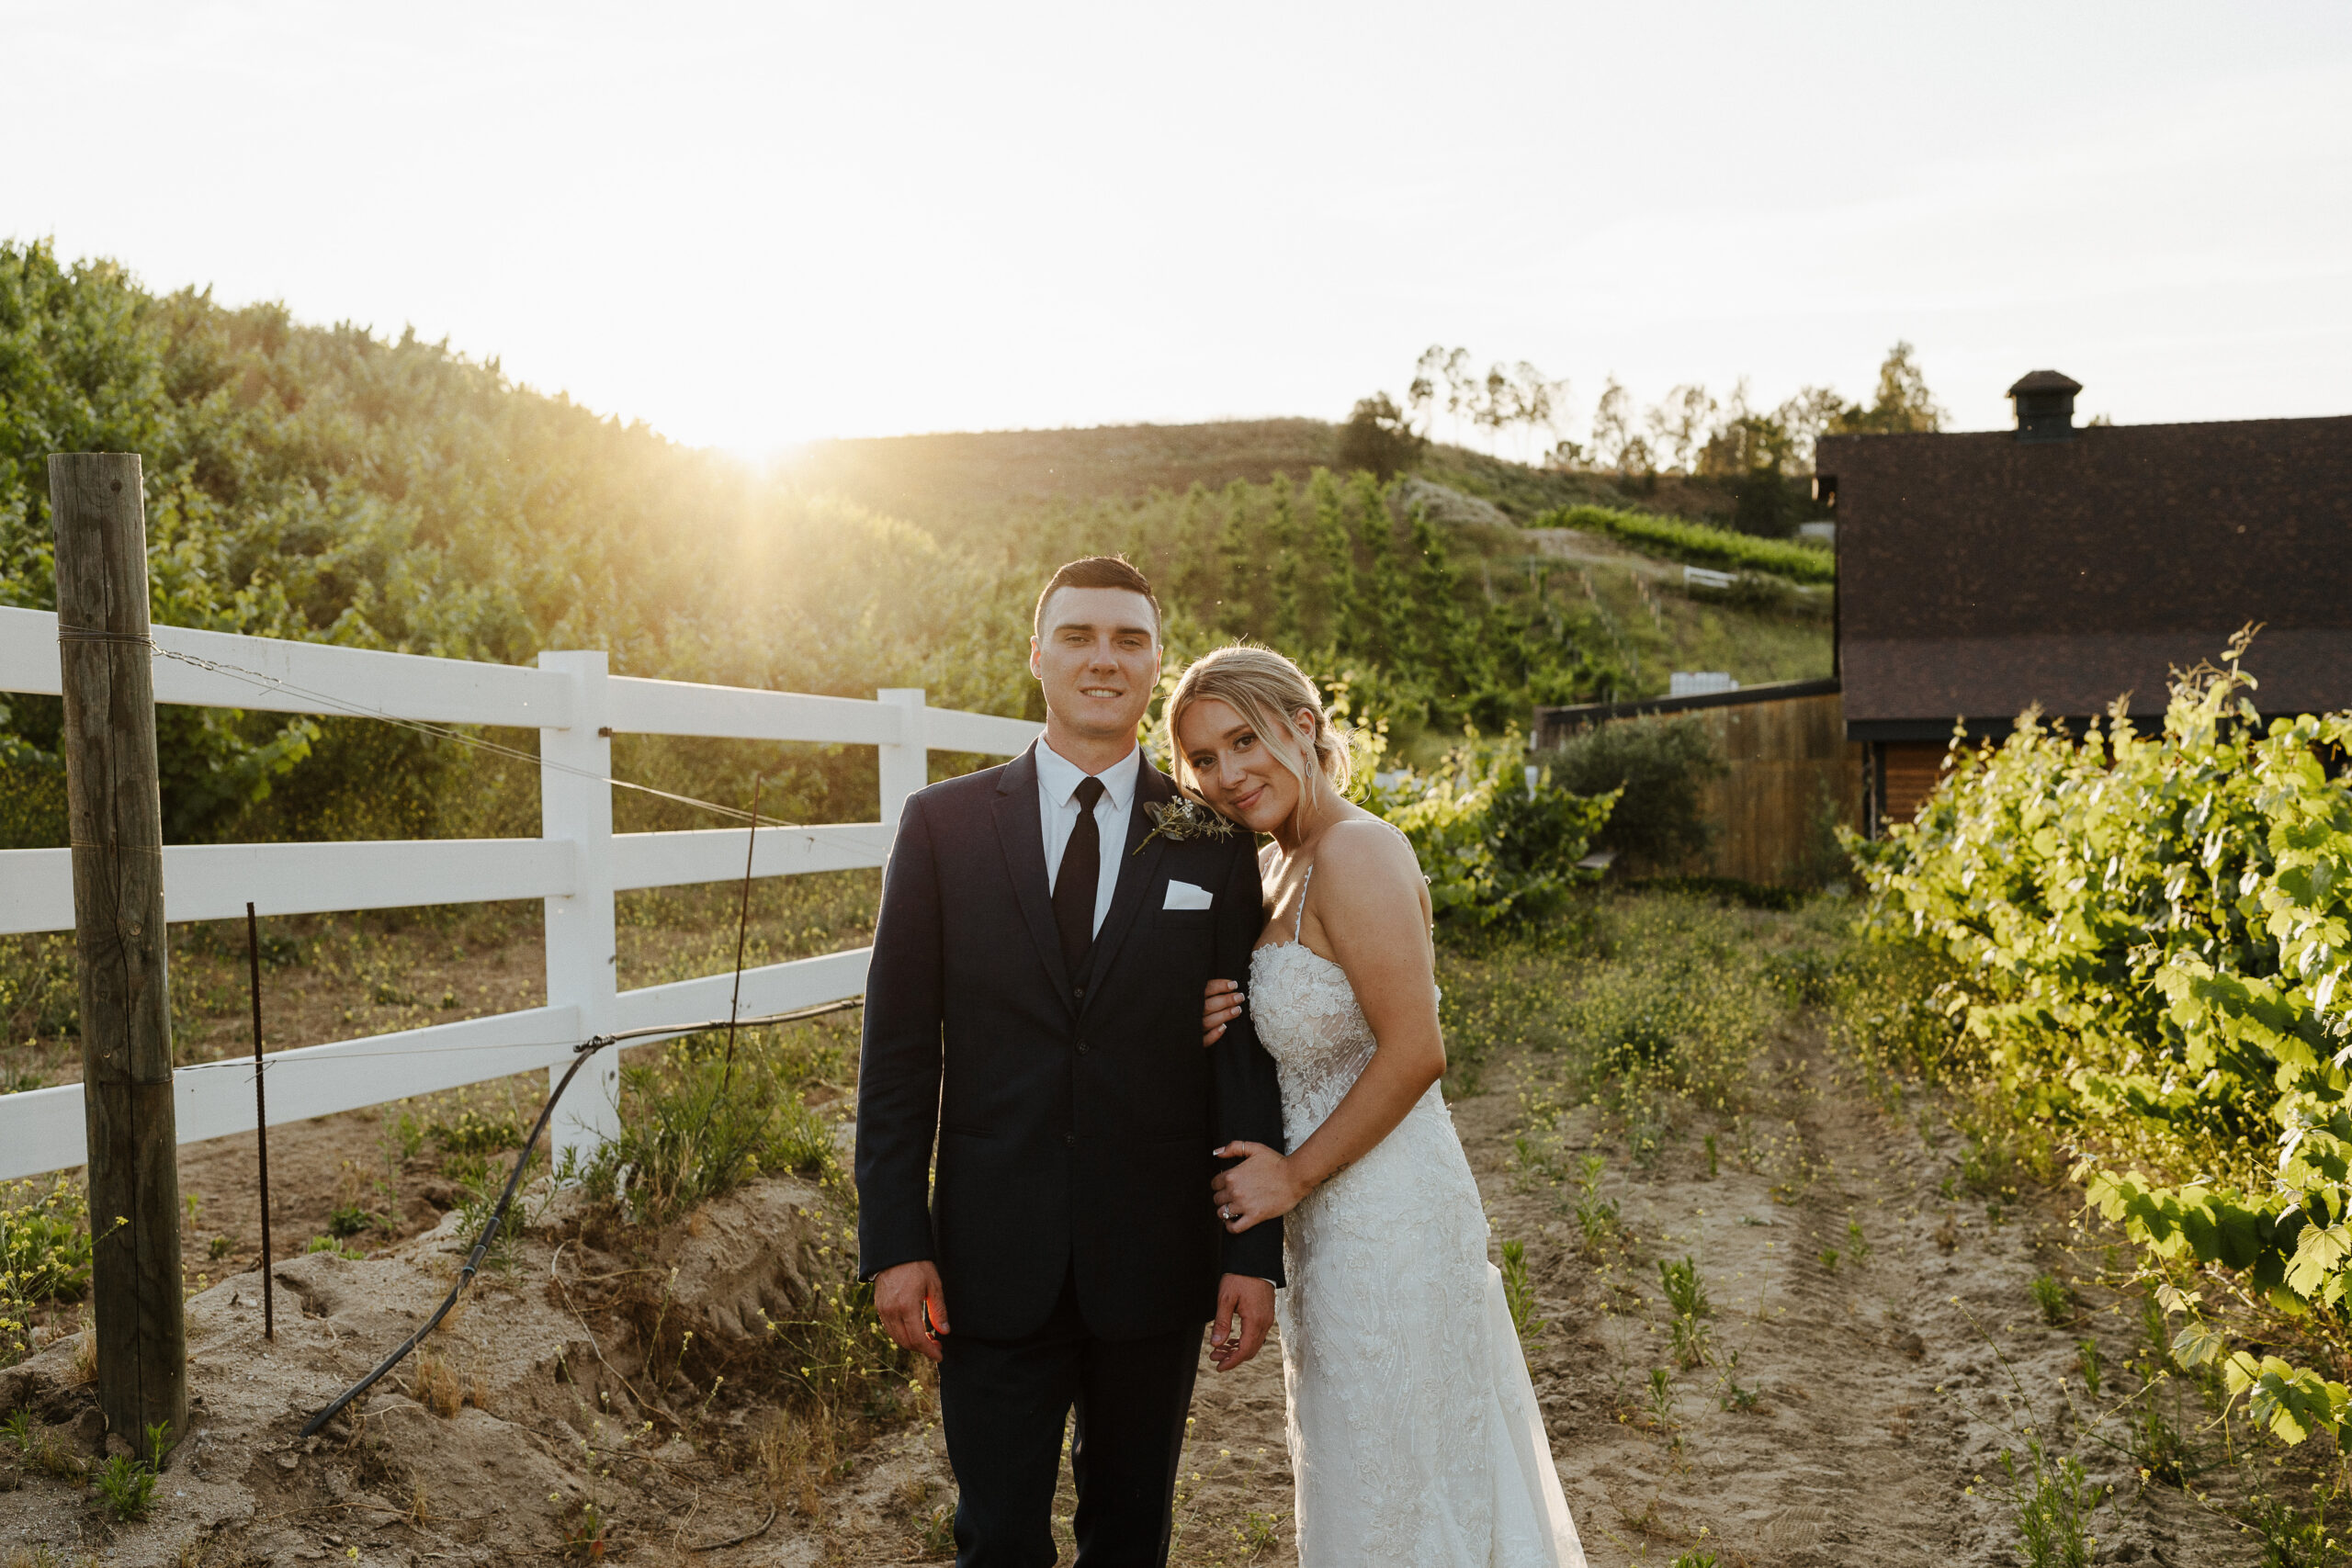 Longshadow Ranch and Winery wedding